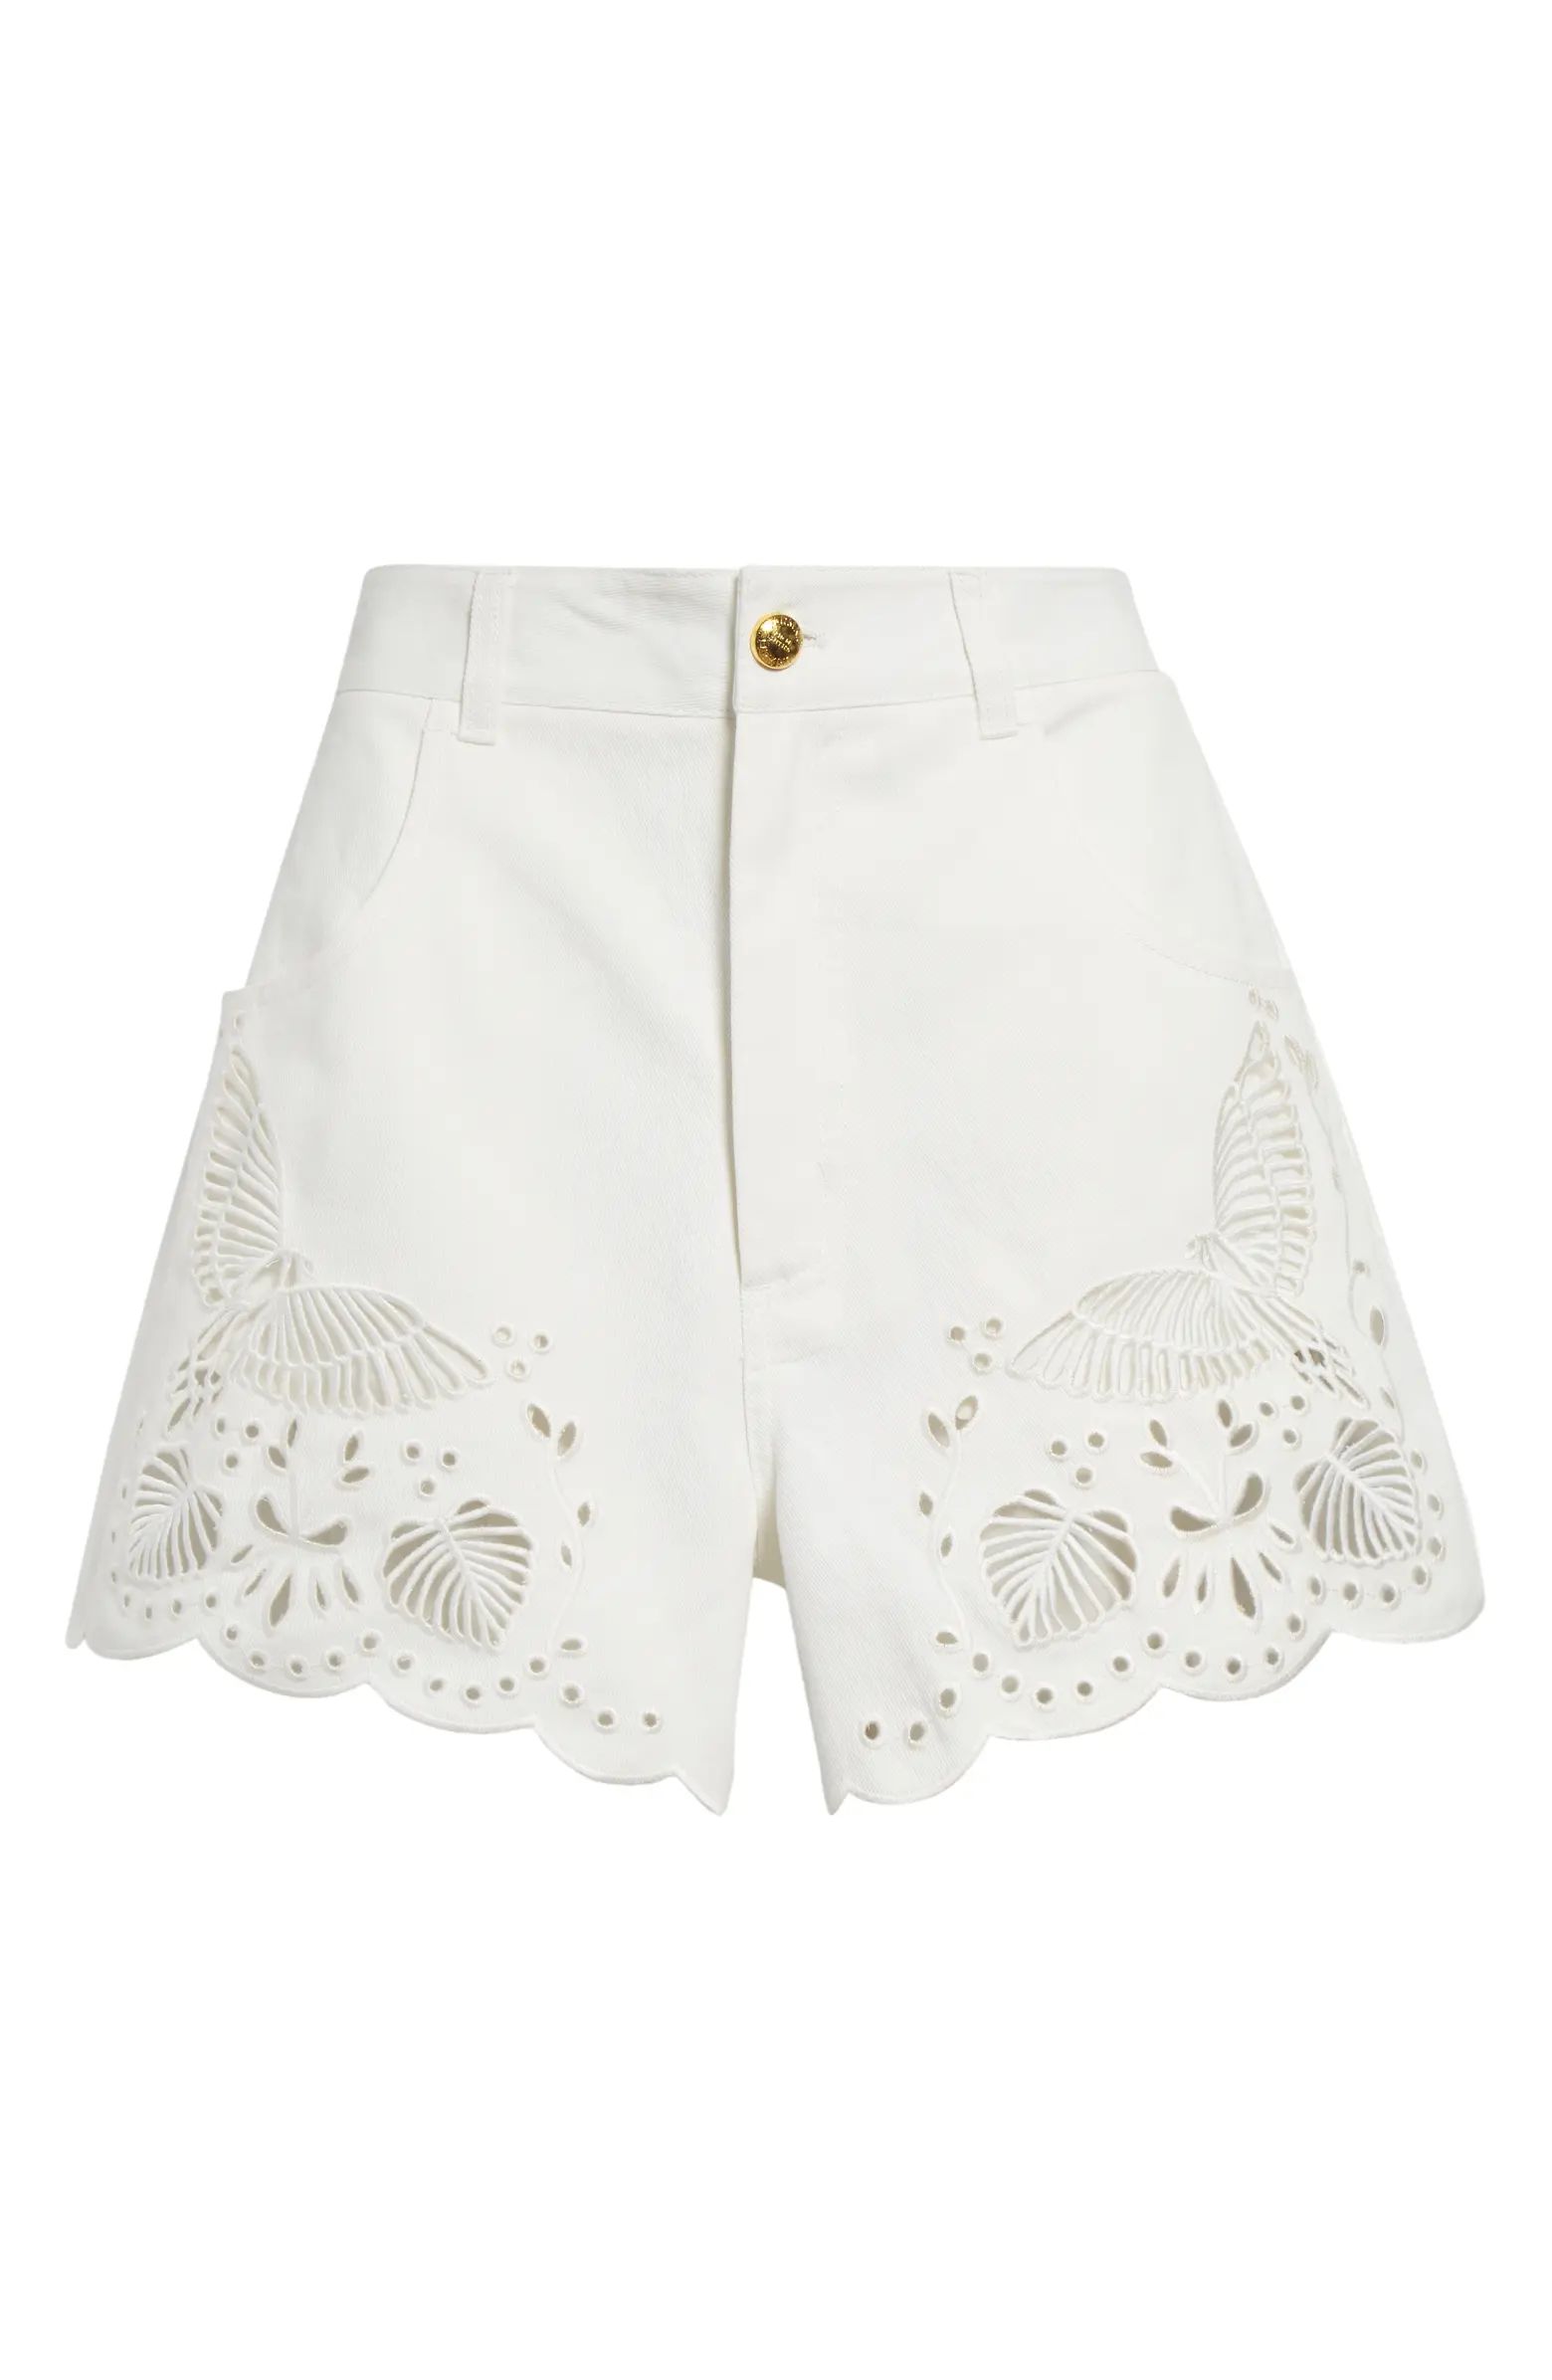 Richilieu Eyelet Embroidered Shorts | Nordstrom